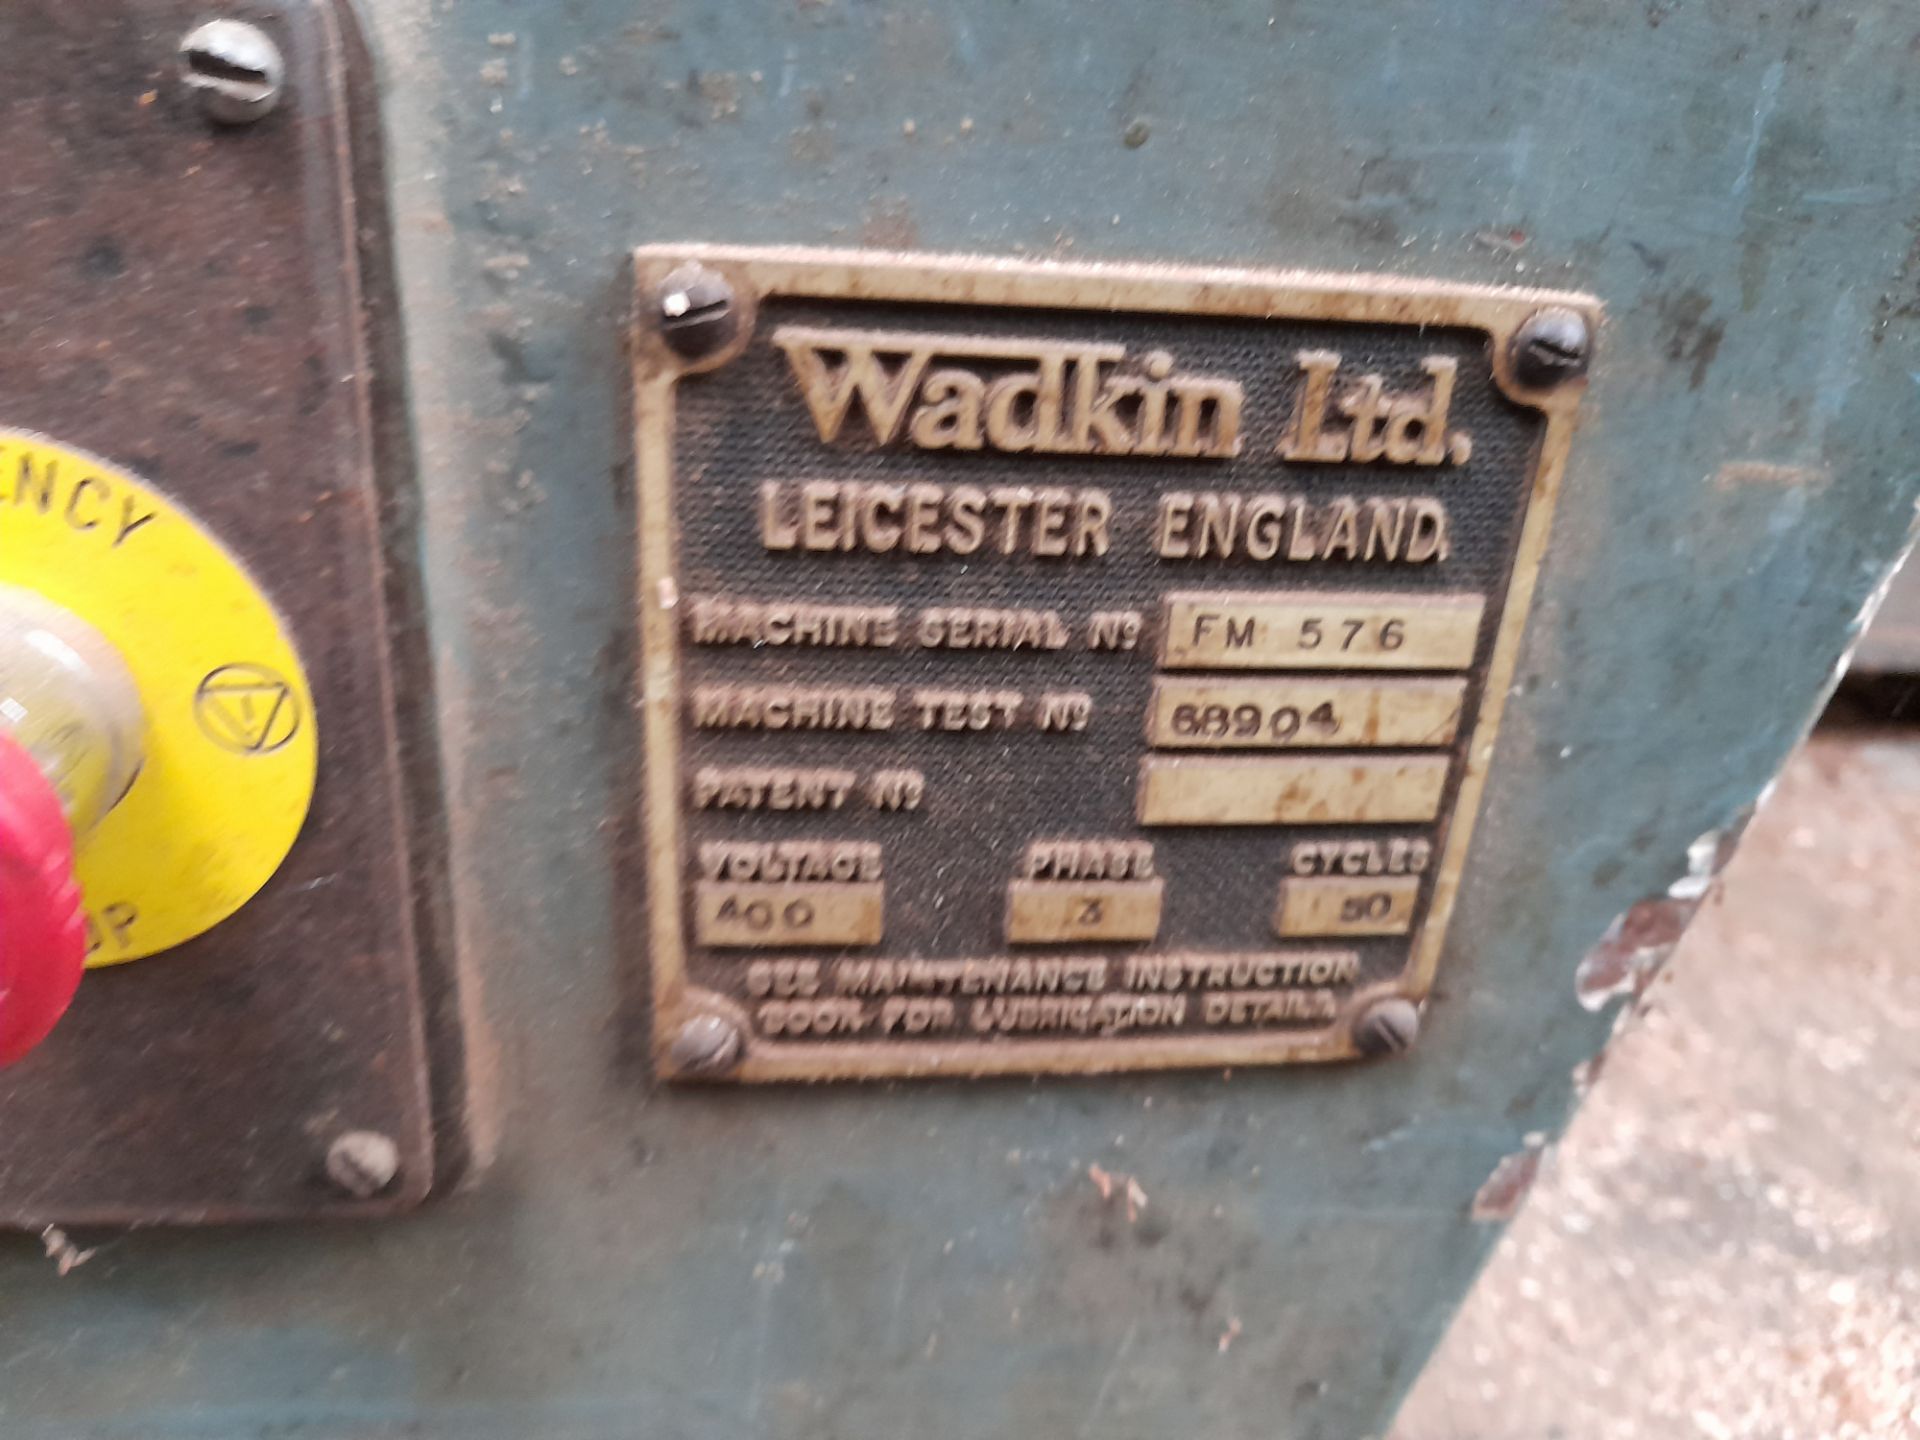 Wadkin FM throughfeed Planer, Serial Number FM576 - Image 2 of 3